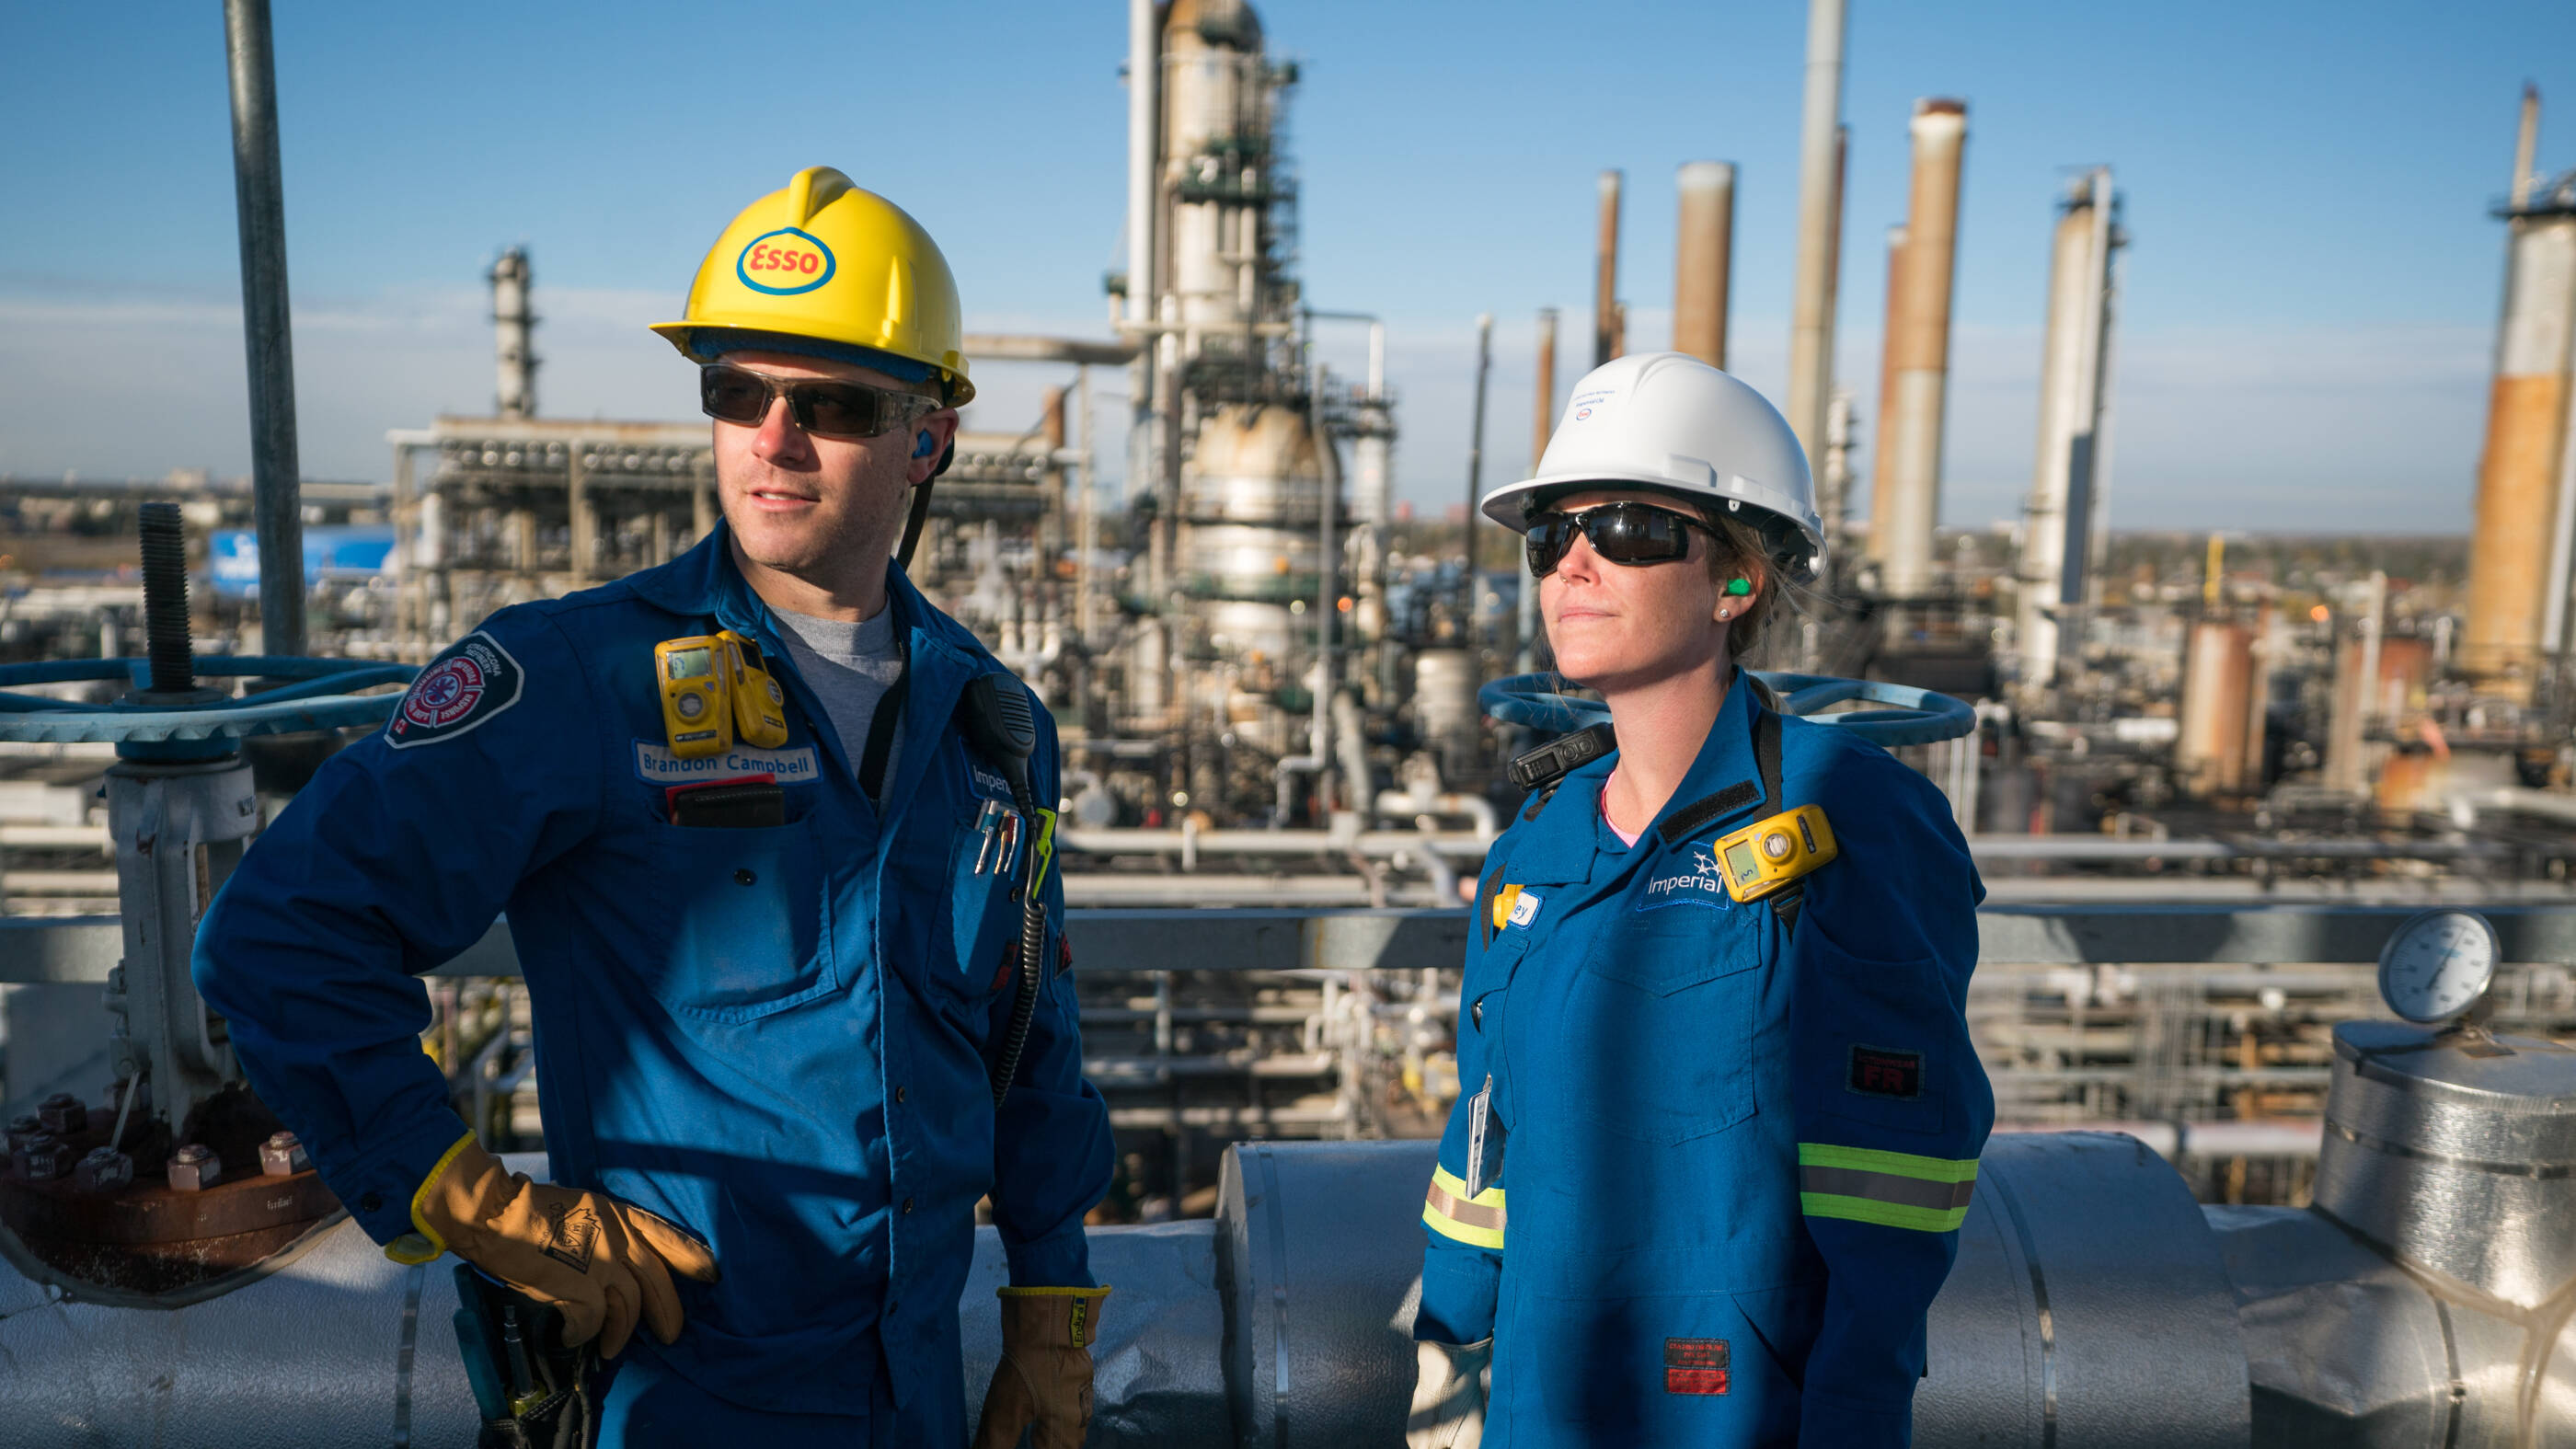 employees in safety gear surveying refinery operations